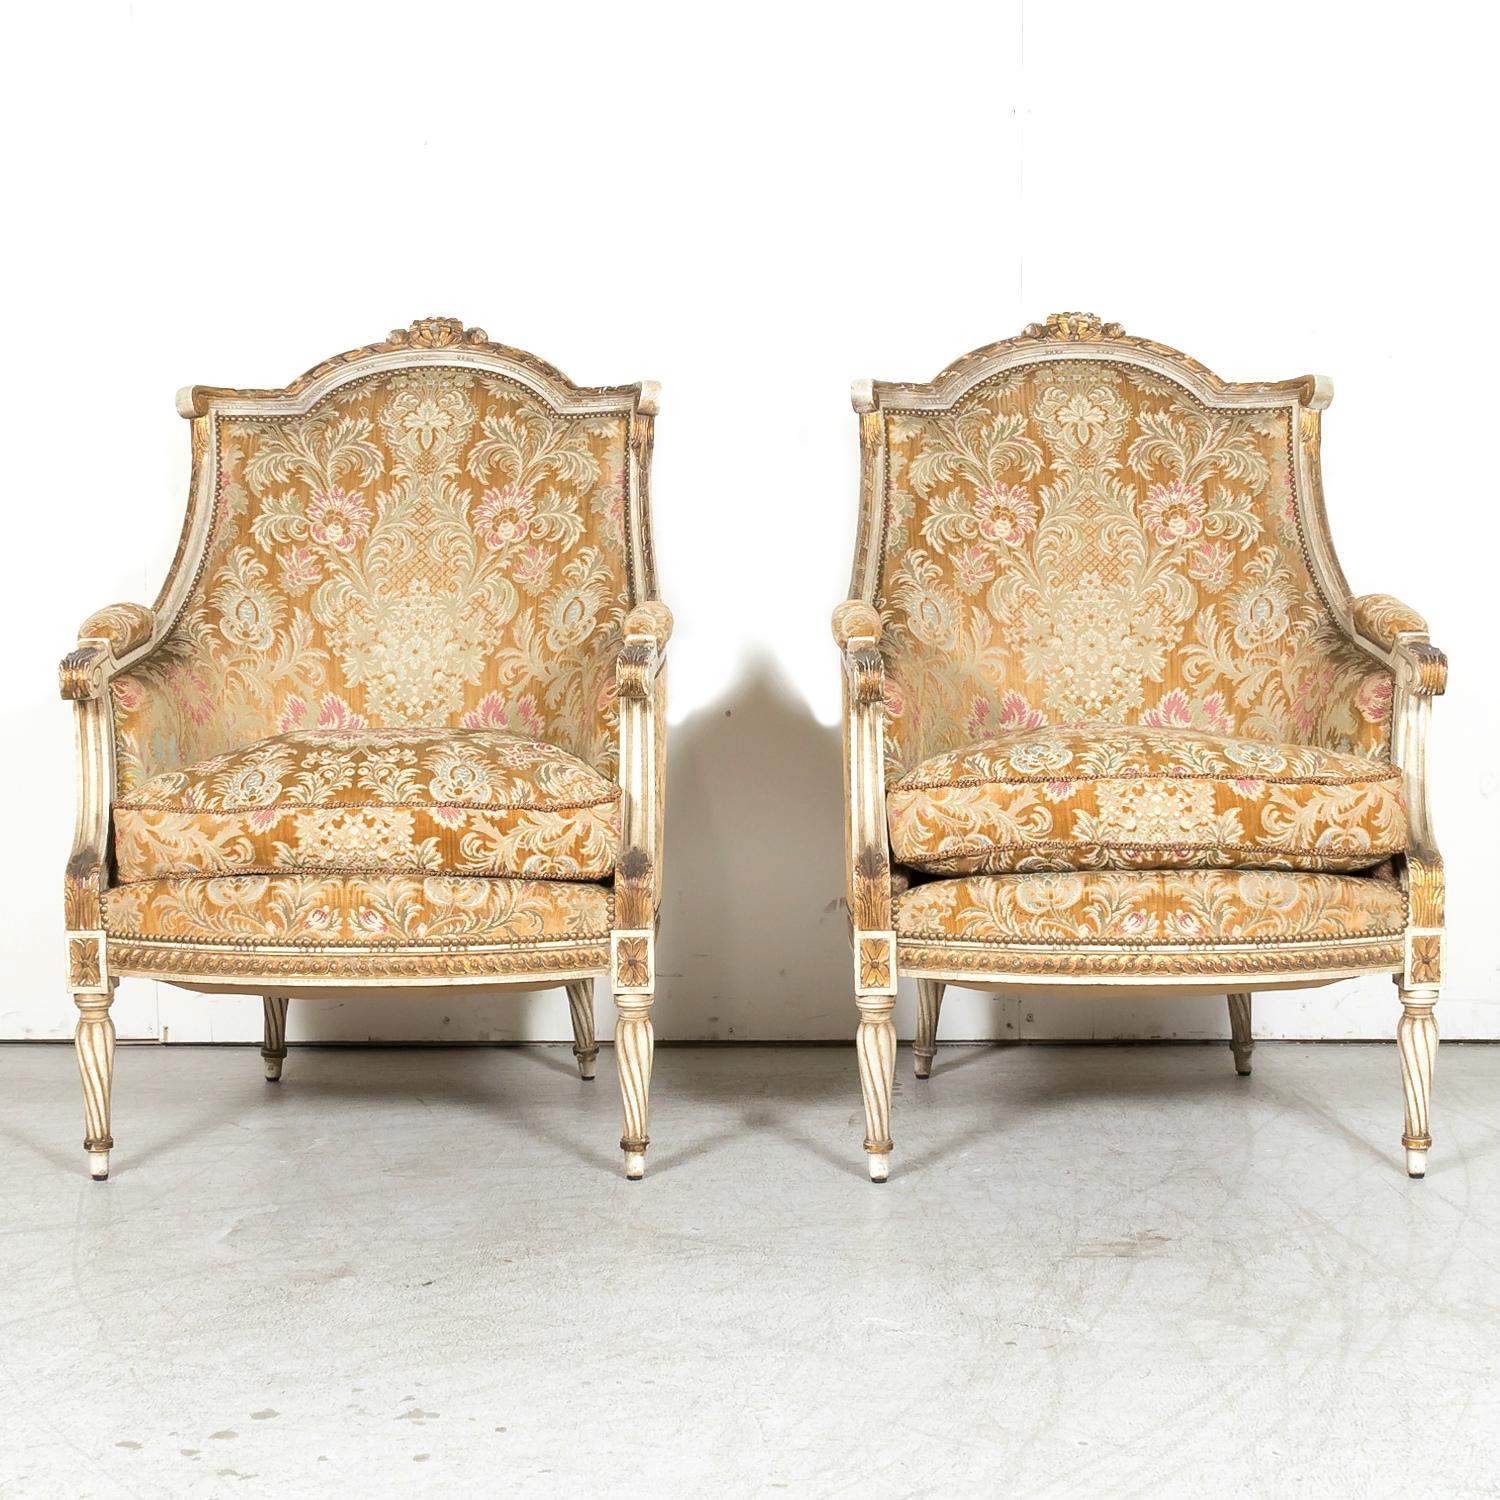 Pair of French Louis XVI Style Parcel Gilt and Painted Maison Jansen Bergeres  In Good Condition For Sale In Birmingham, AL